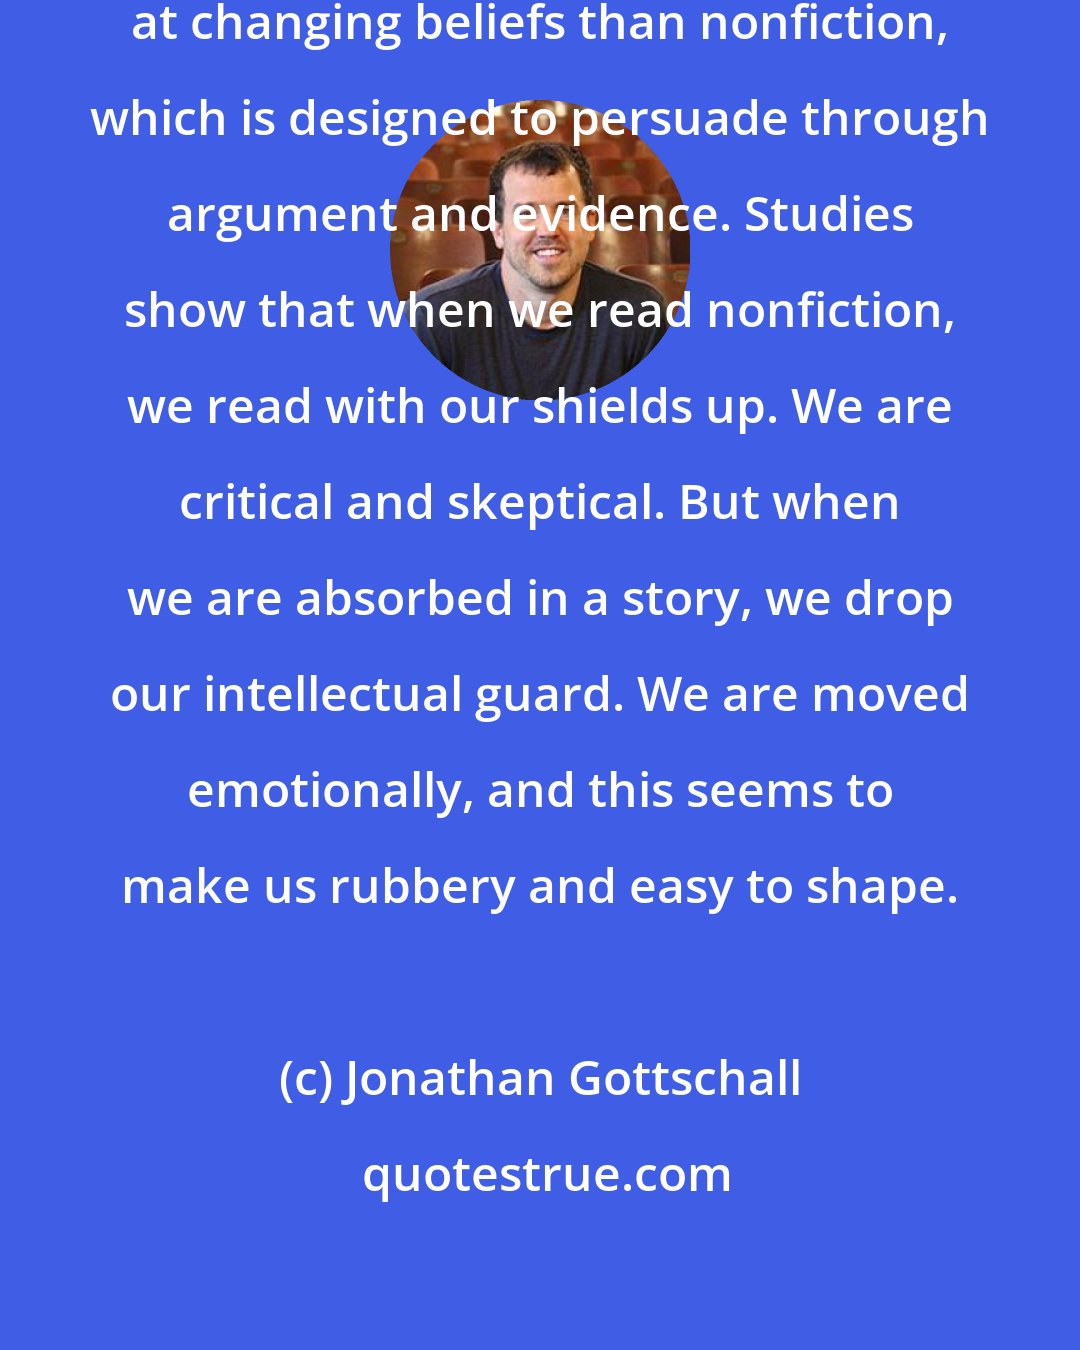 Jonathan Gottschall: Fiction seems to be more effective at changing beliefs than nonfiction, which is designed to persuade through argument and evidence. Studies show that when we read nonfiction, we read with our shields up. We are critical and skeptical. But when we are absorbed in a story, we drop our intellectual guard. We are moved emotionally, and this seems to make us rubbery and easy to shape.